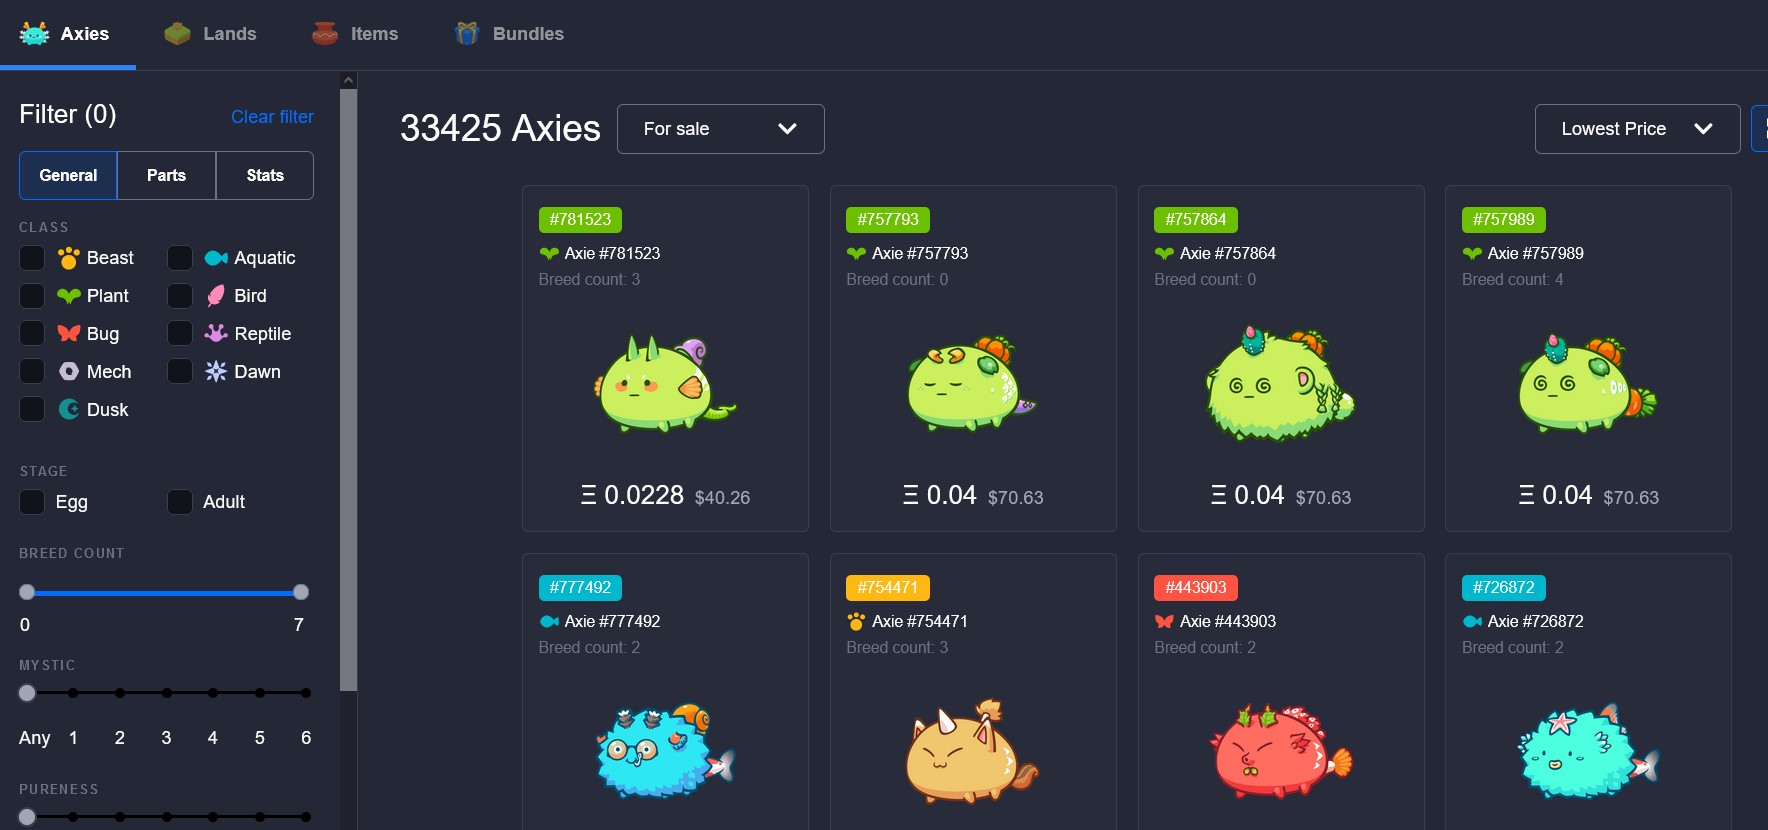 Axies in the Marketplace